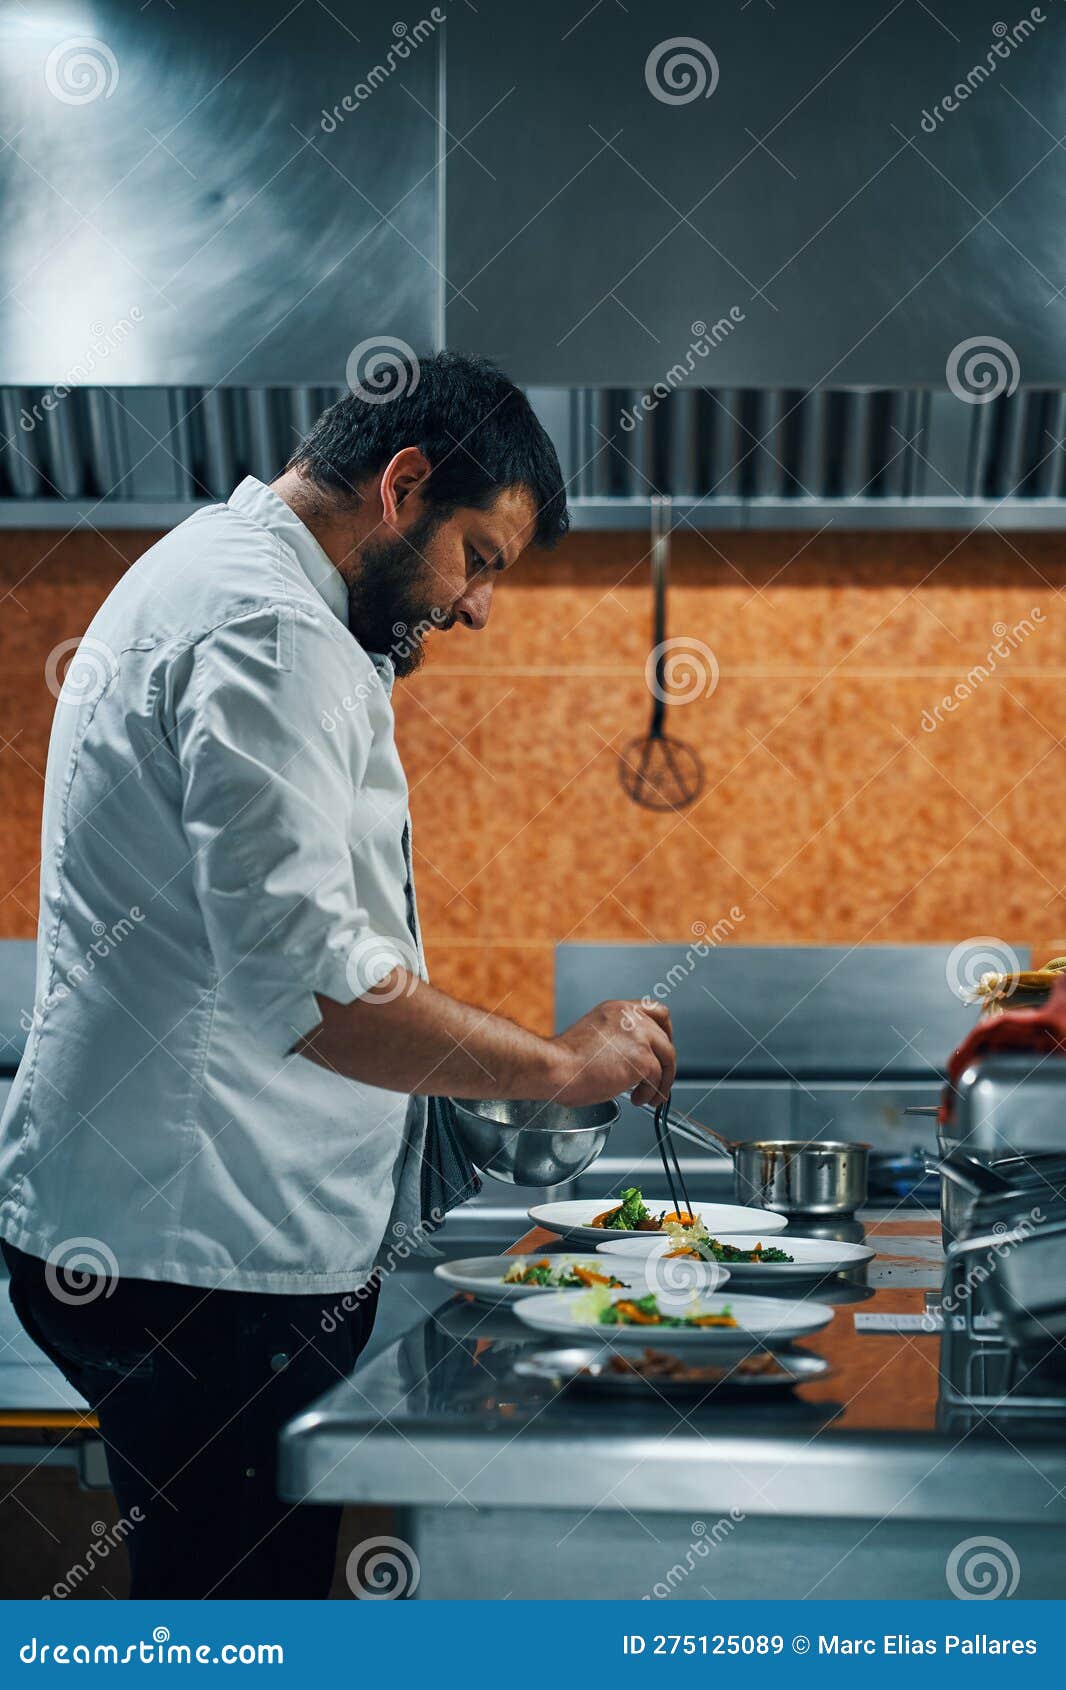 Chef Preparing Dishes for Tasting Menu Stock Image - Image of eatery ...